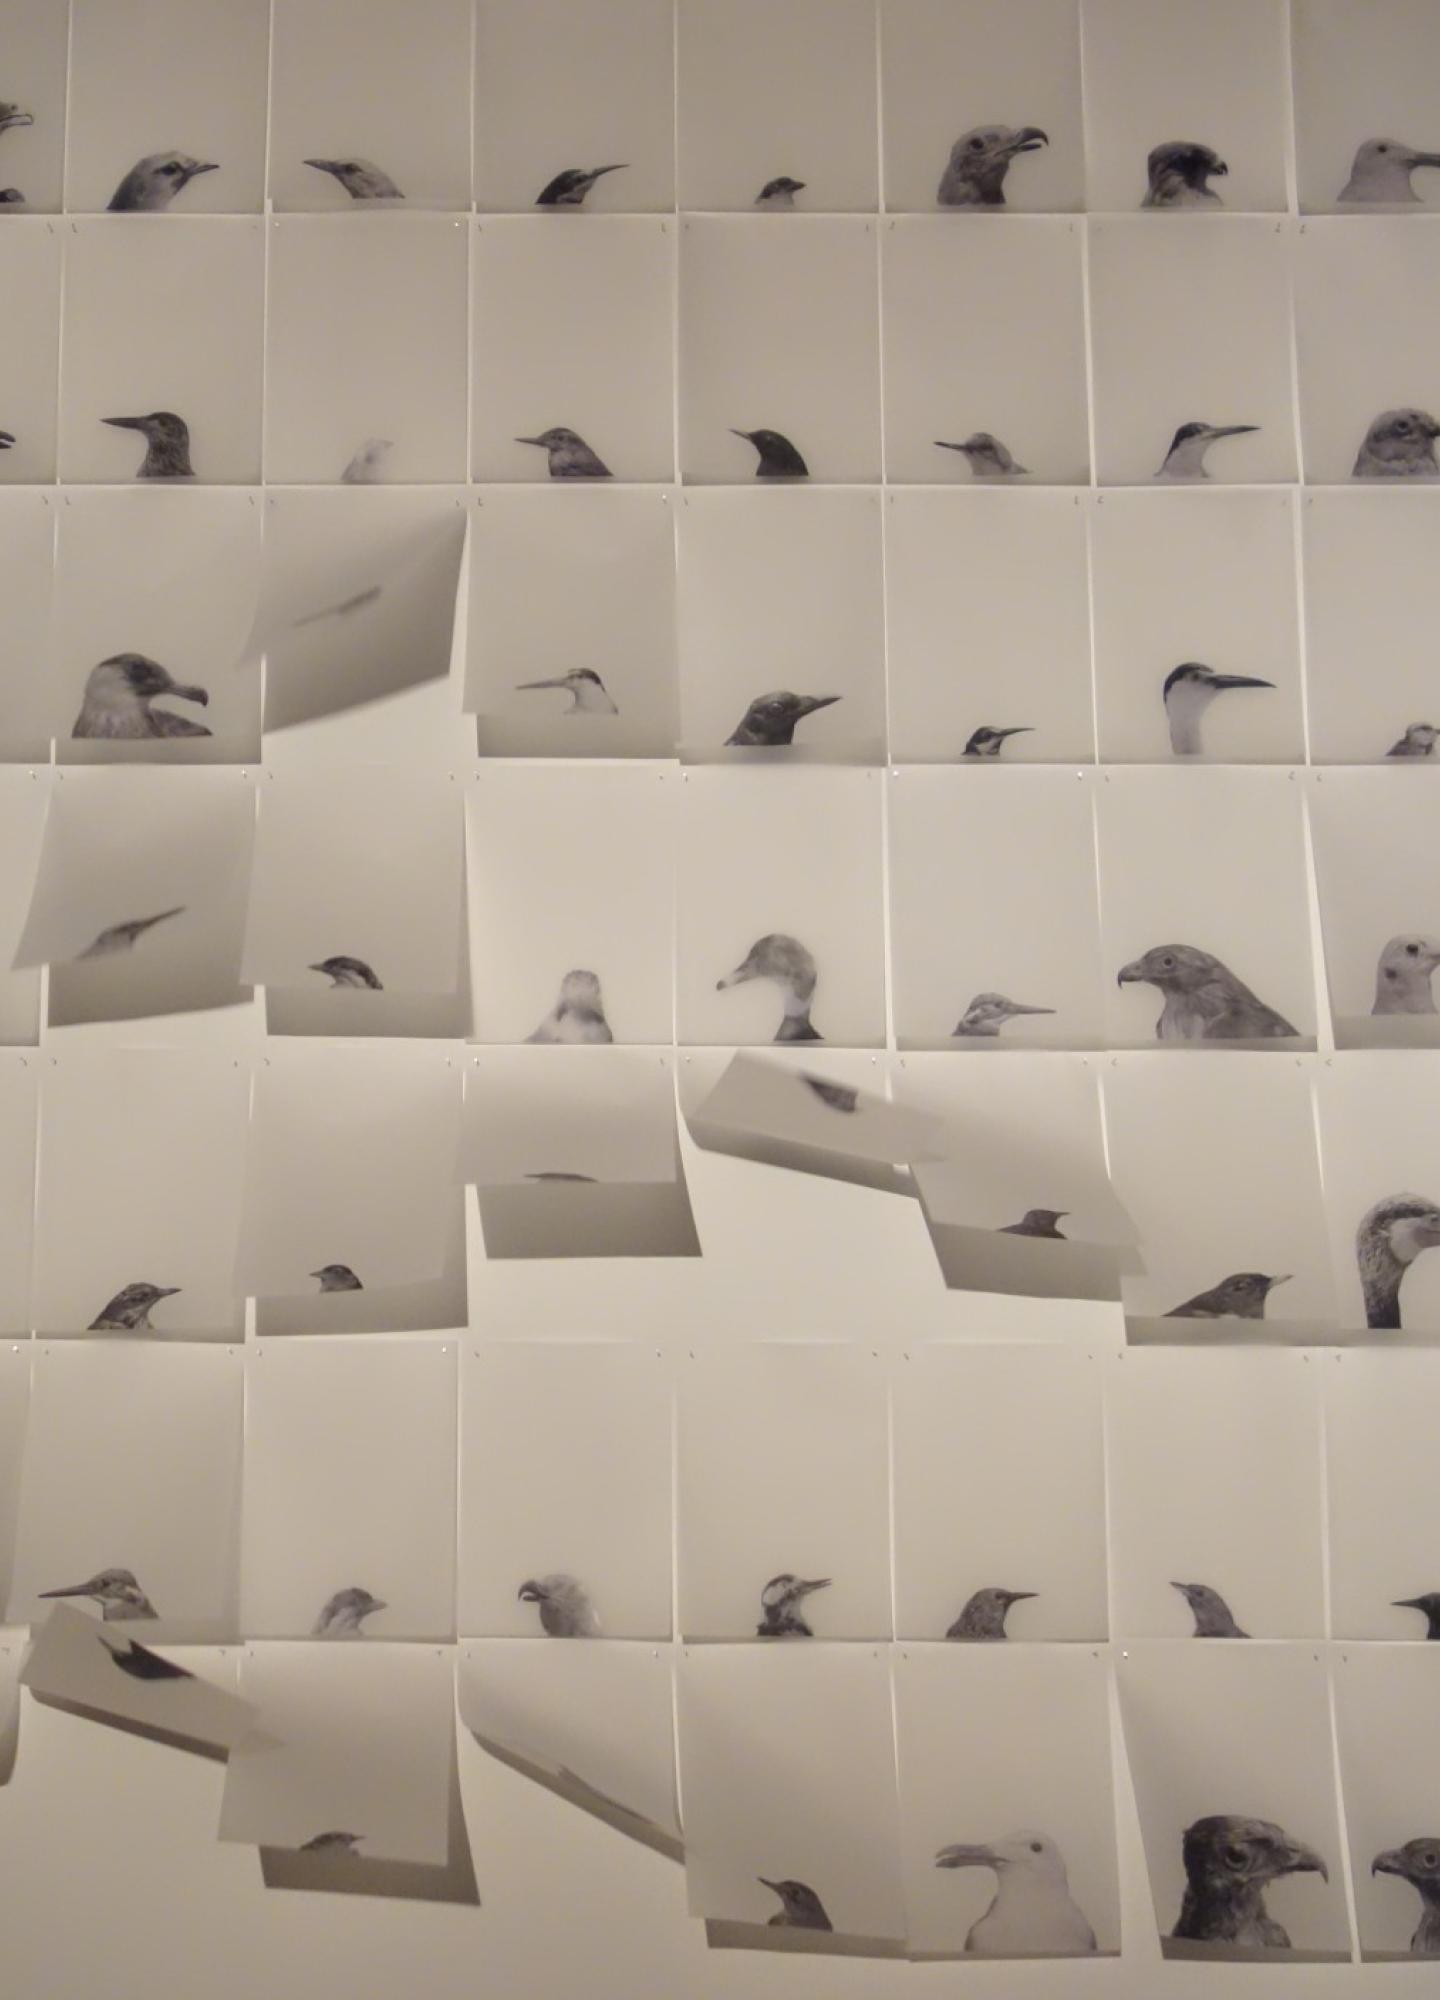 monochrome images of birds on a wall